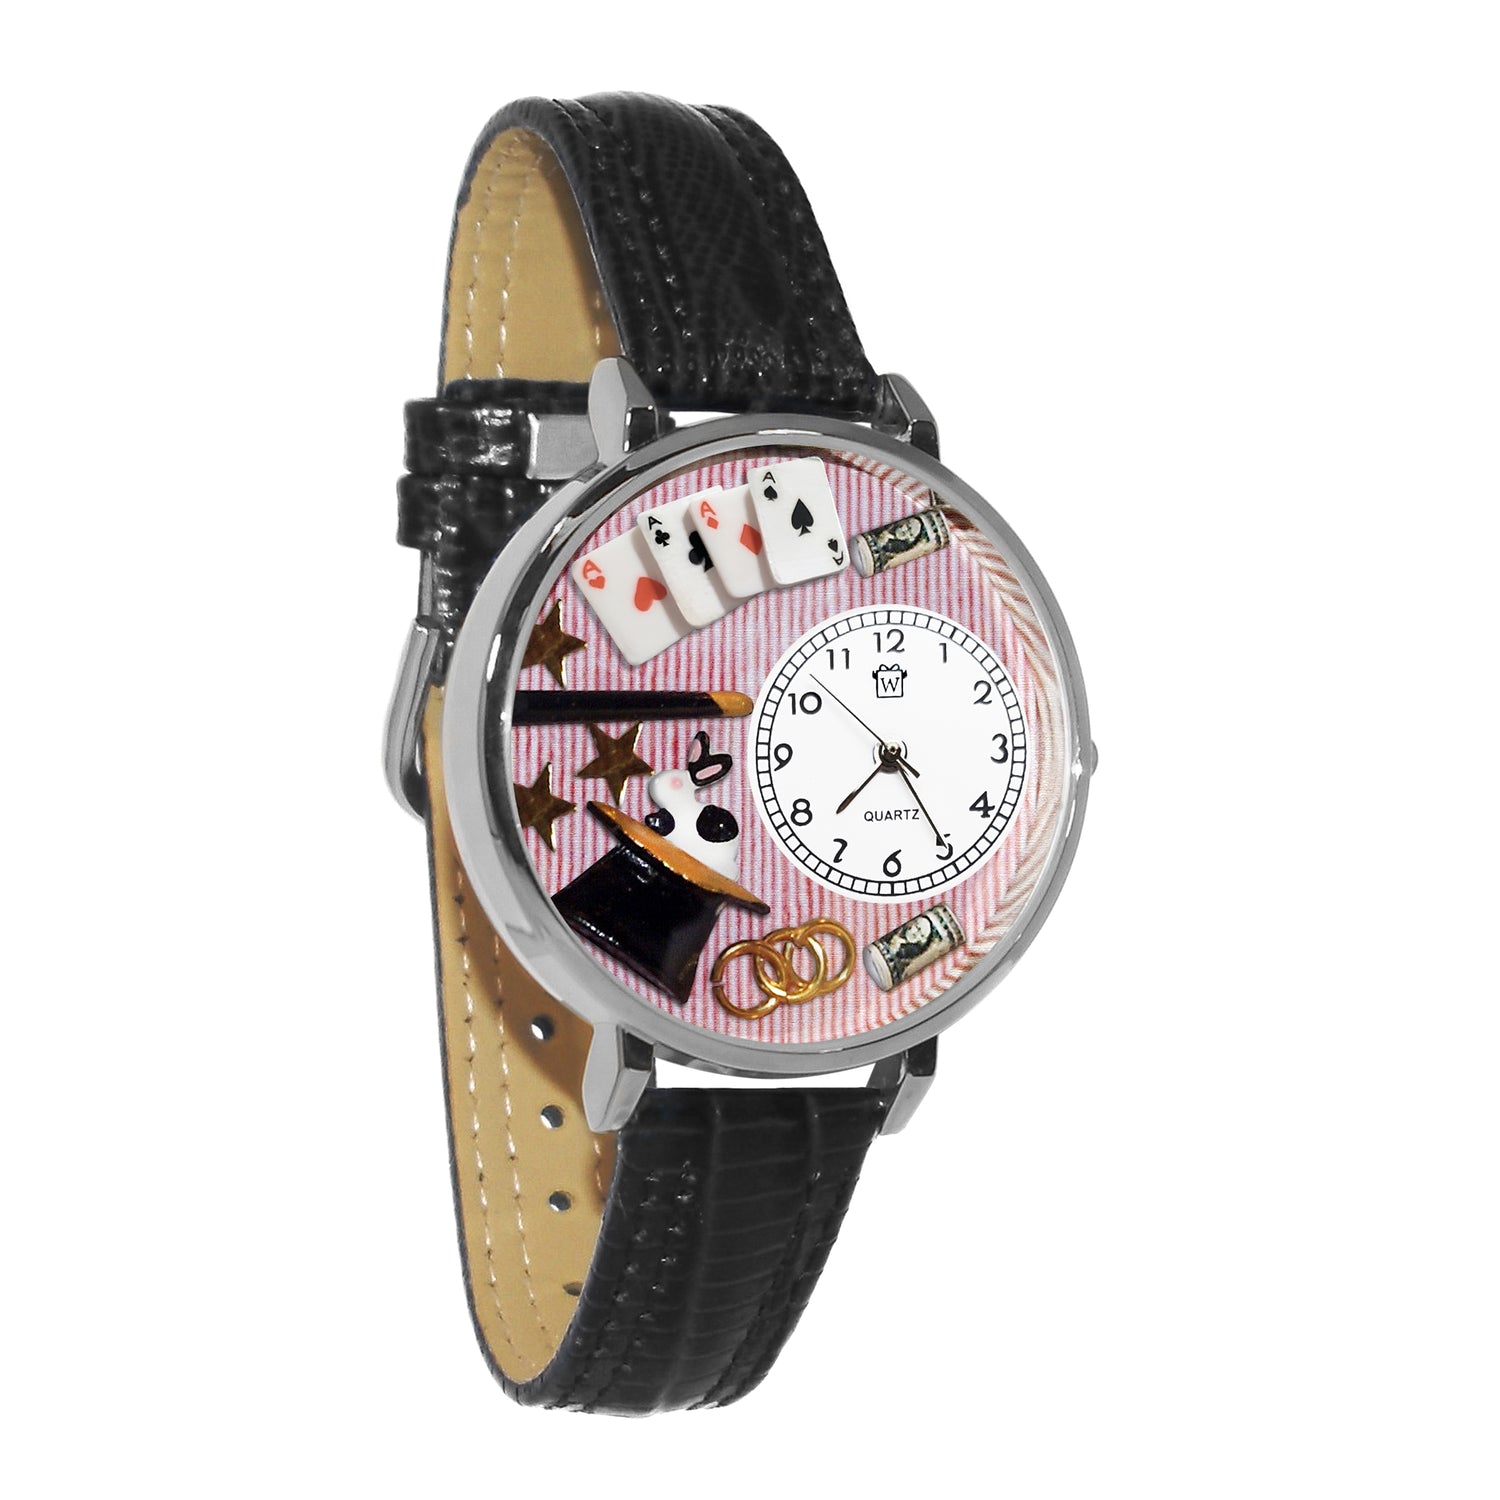 Whimsical Gifts | Magic 3D Watch Large Style | Handmade in USA | Hobbies & Special Interests | Arts & Performance | Novelty Unique Fun Miniatures Gift | Silver Finish Black Leather Watch Band